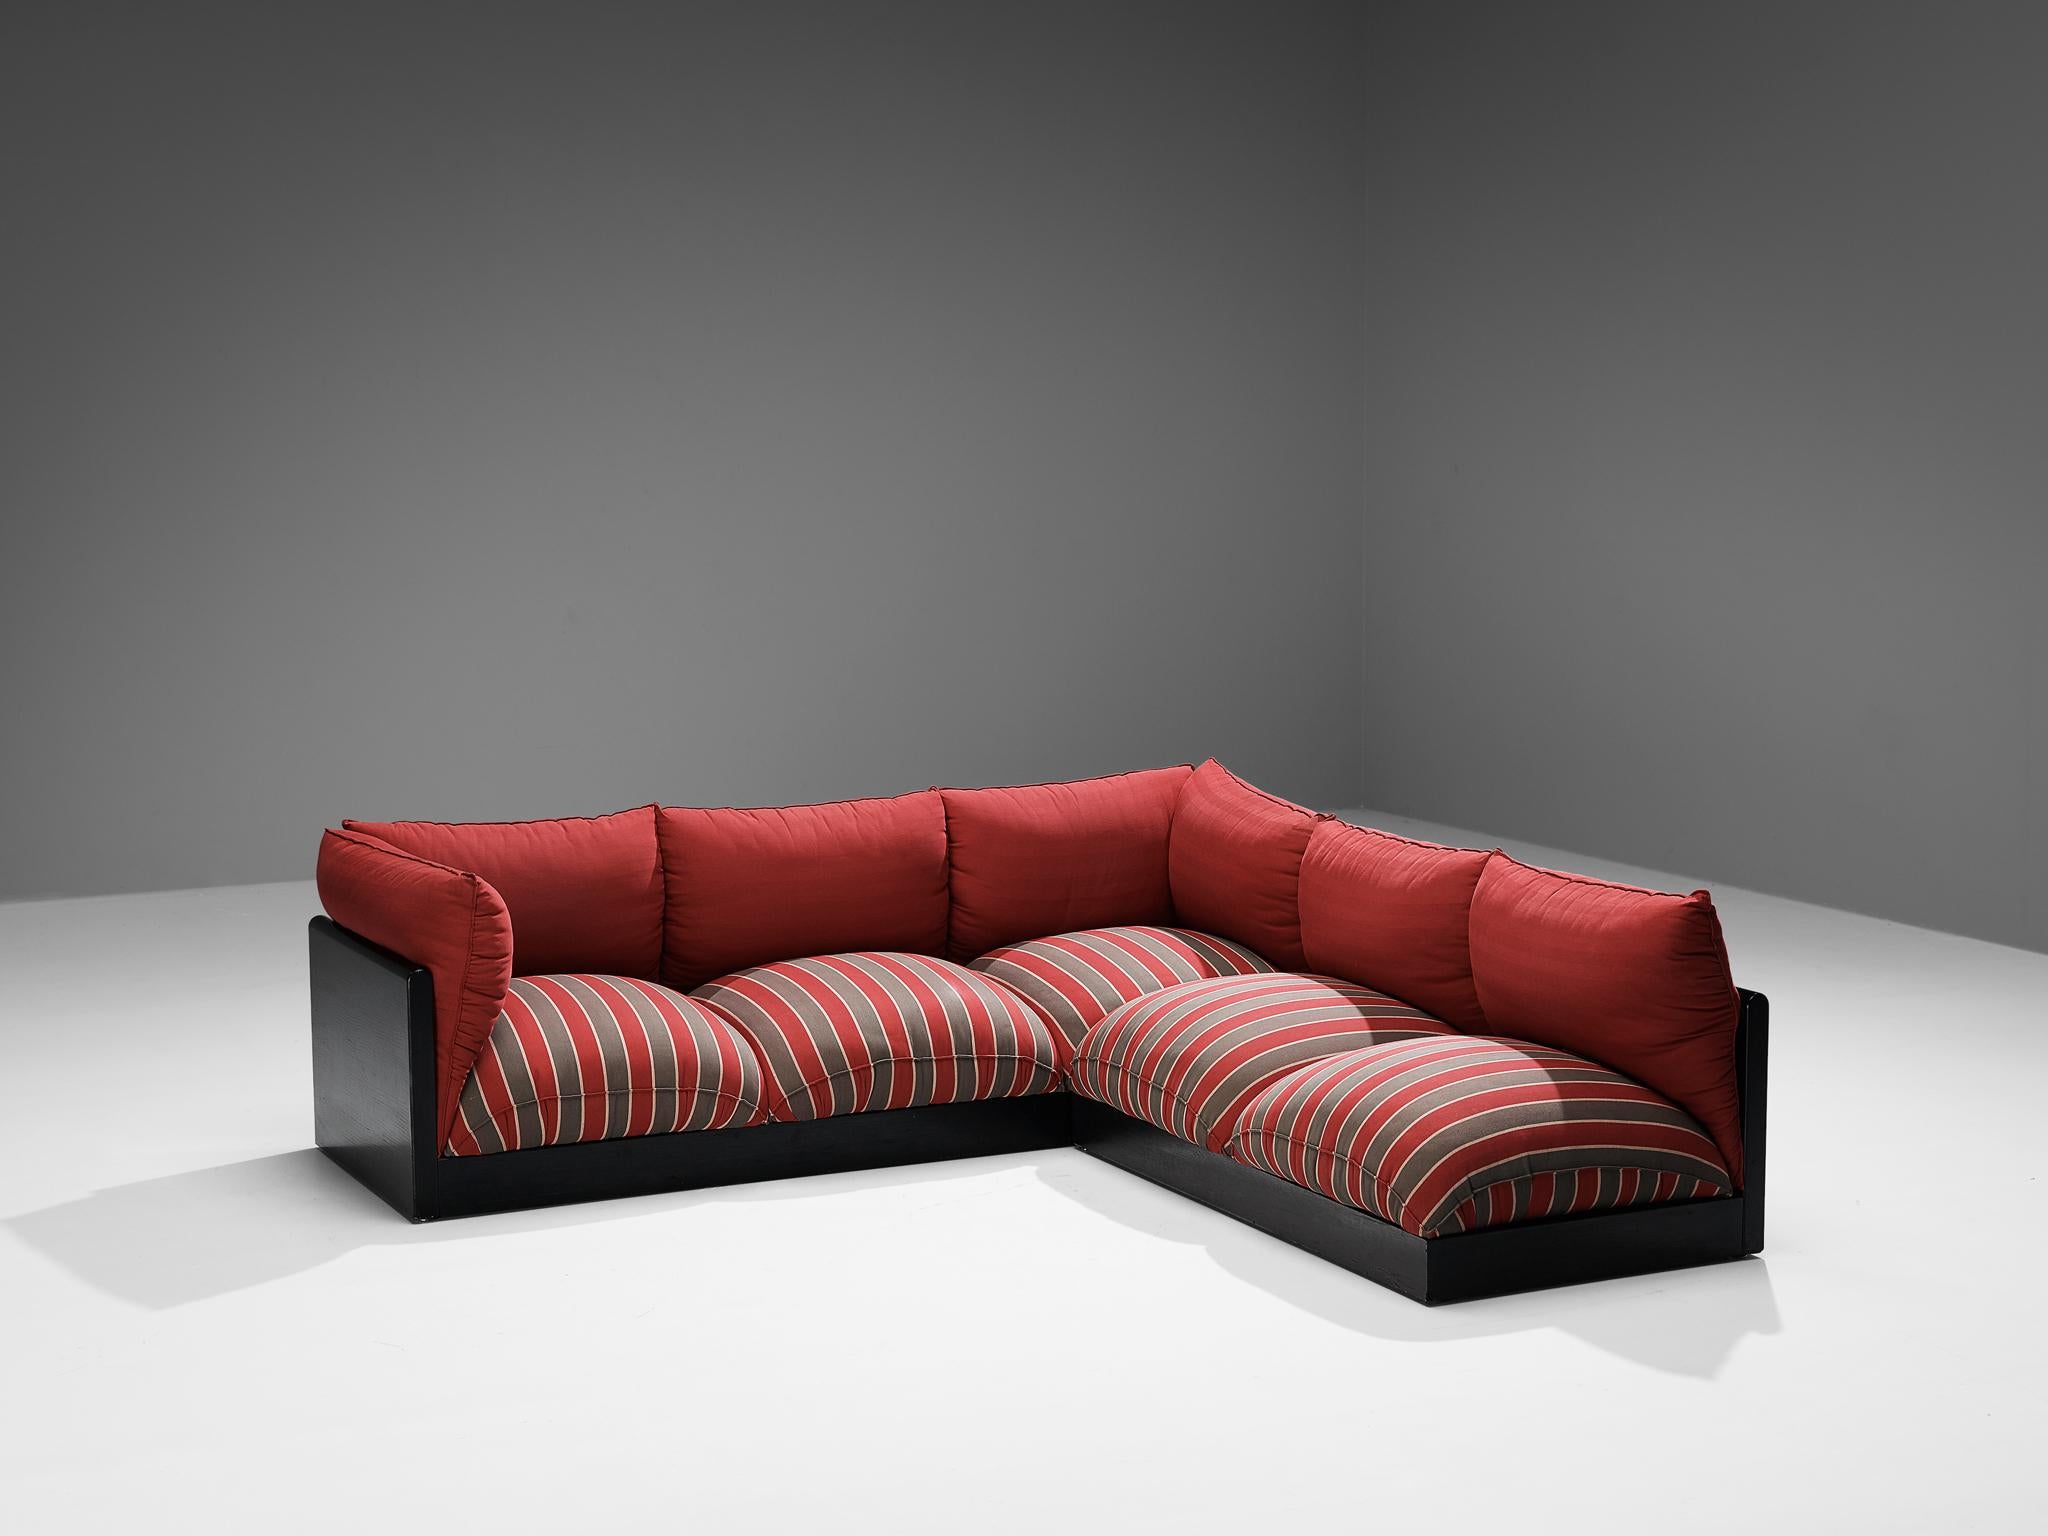 Carlo Bartoli for Rossi di Albizzate, sectional sofa model 'Down', fabric, lacquered wood, Italy, 1973

This design truly resembles the ethos of the seventies – a bright and bold era – featuring voluminous shapes and sharp lines. This sofa is part